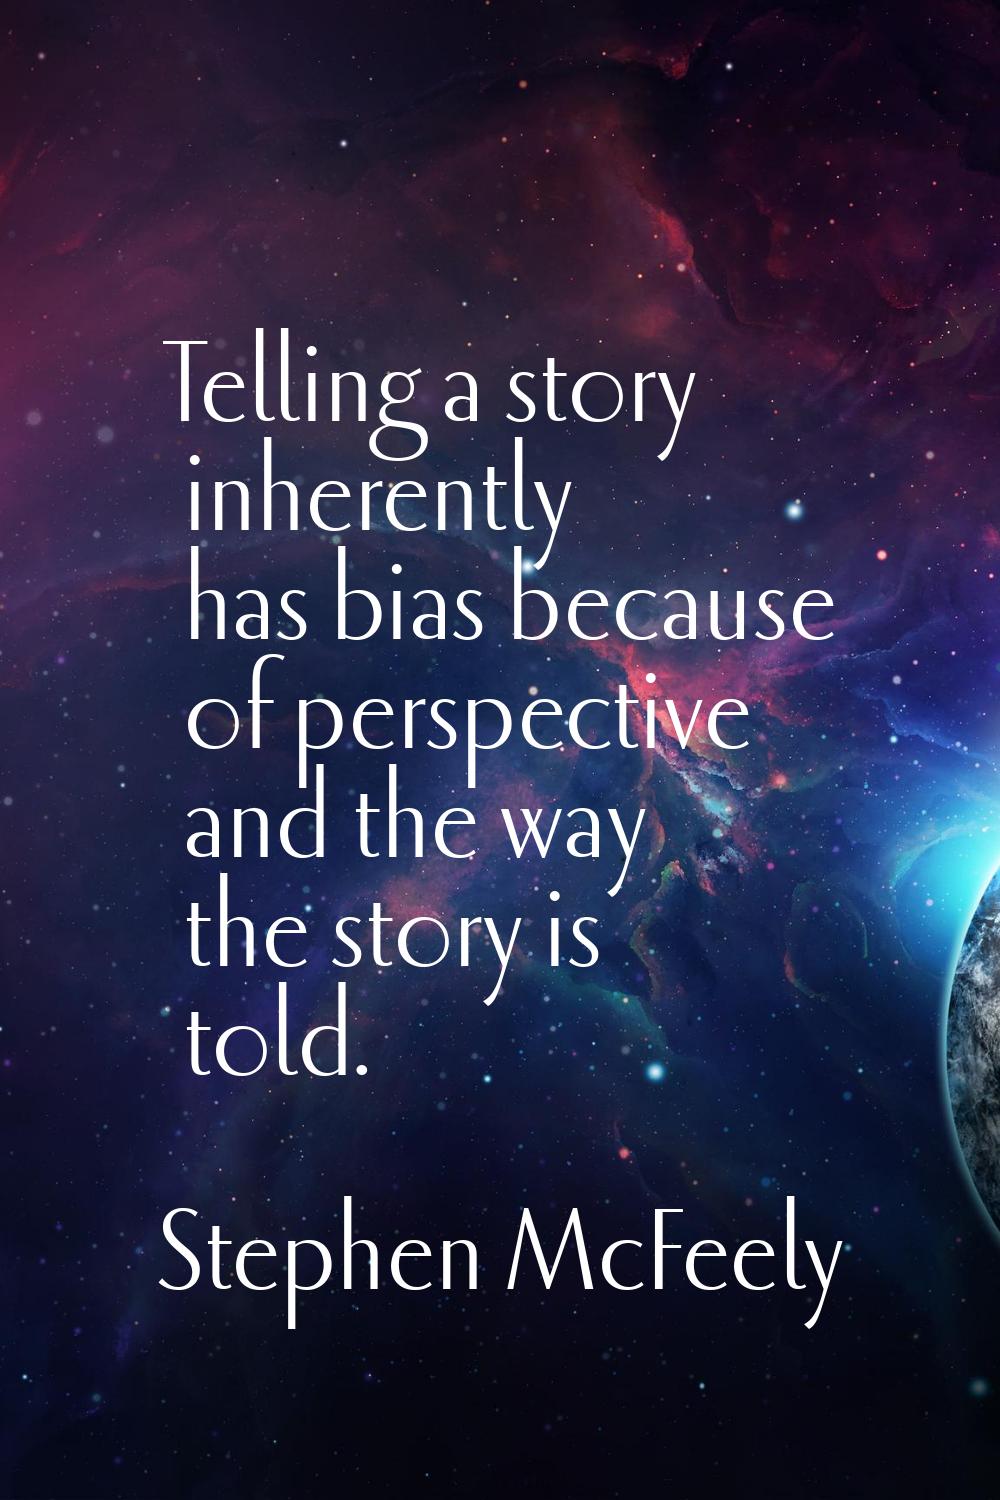 Telling a story inherently has bias because of perspective and the way the story is told.